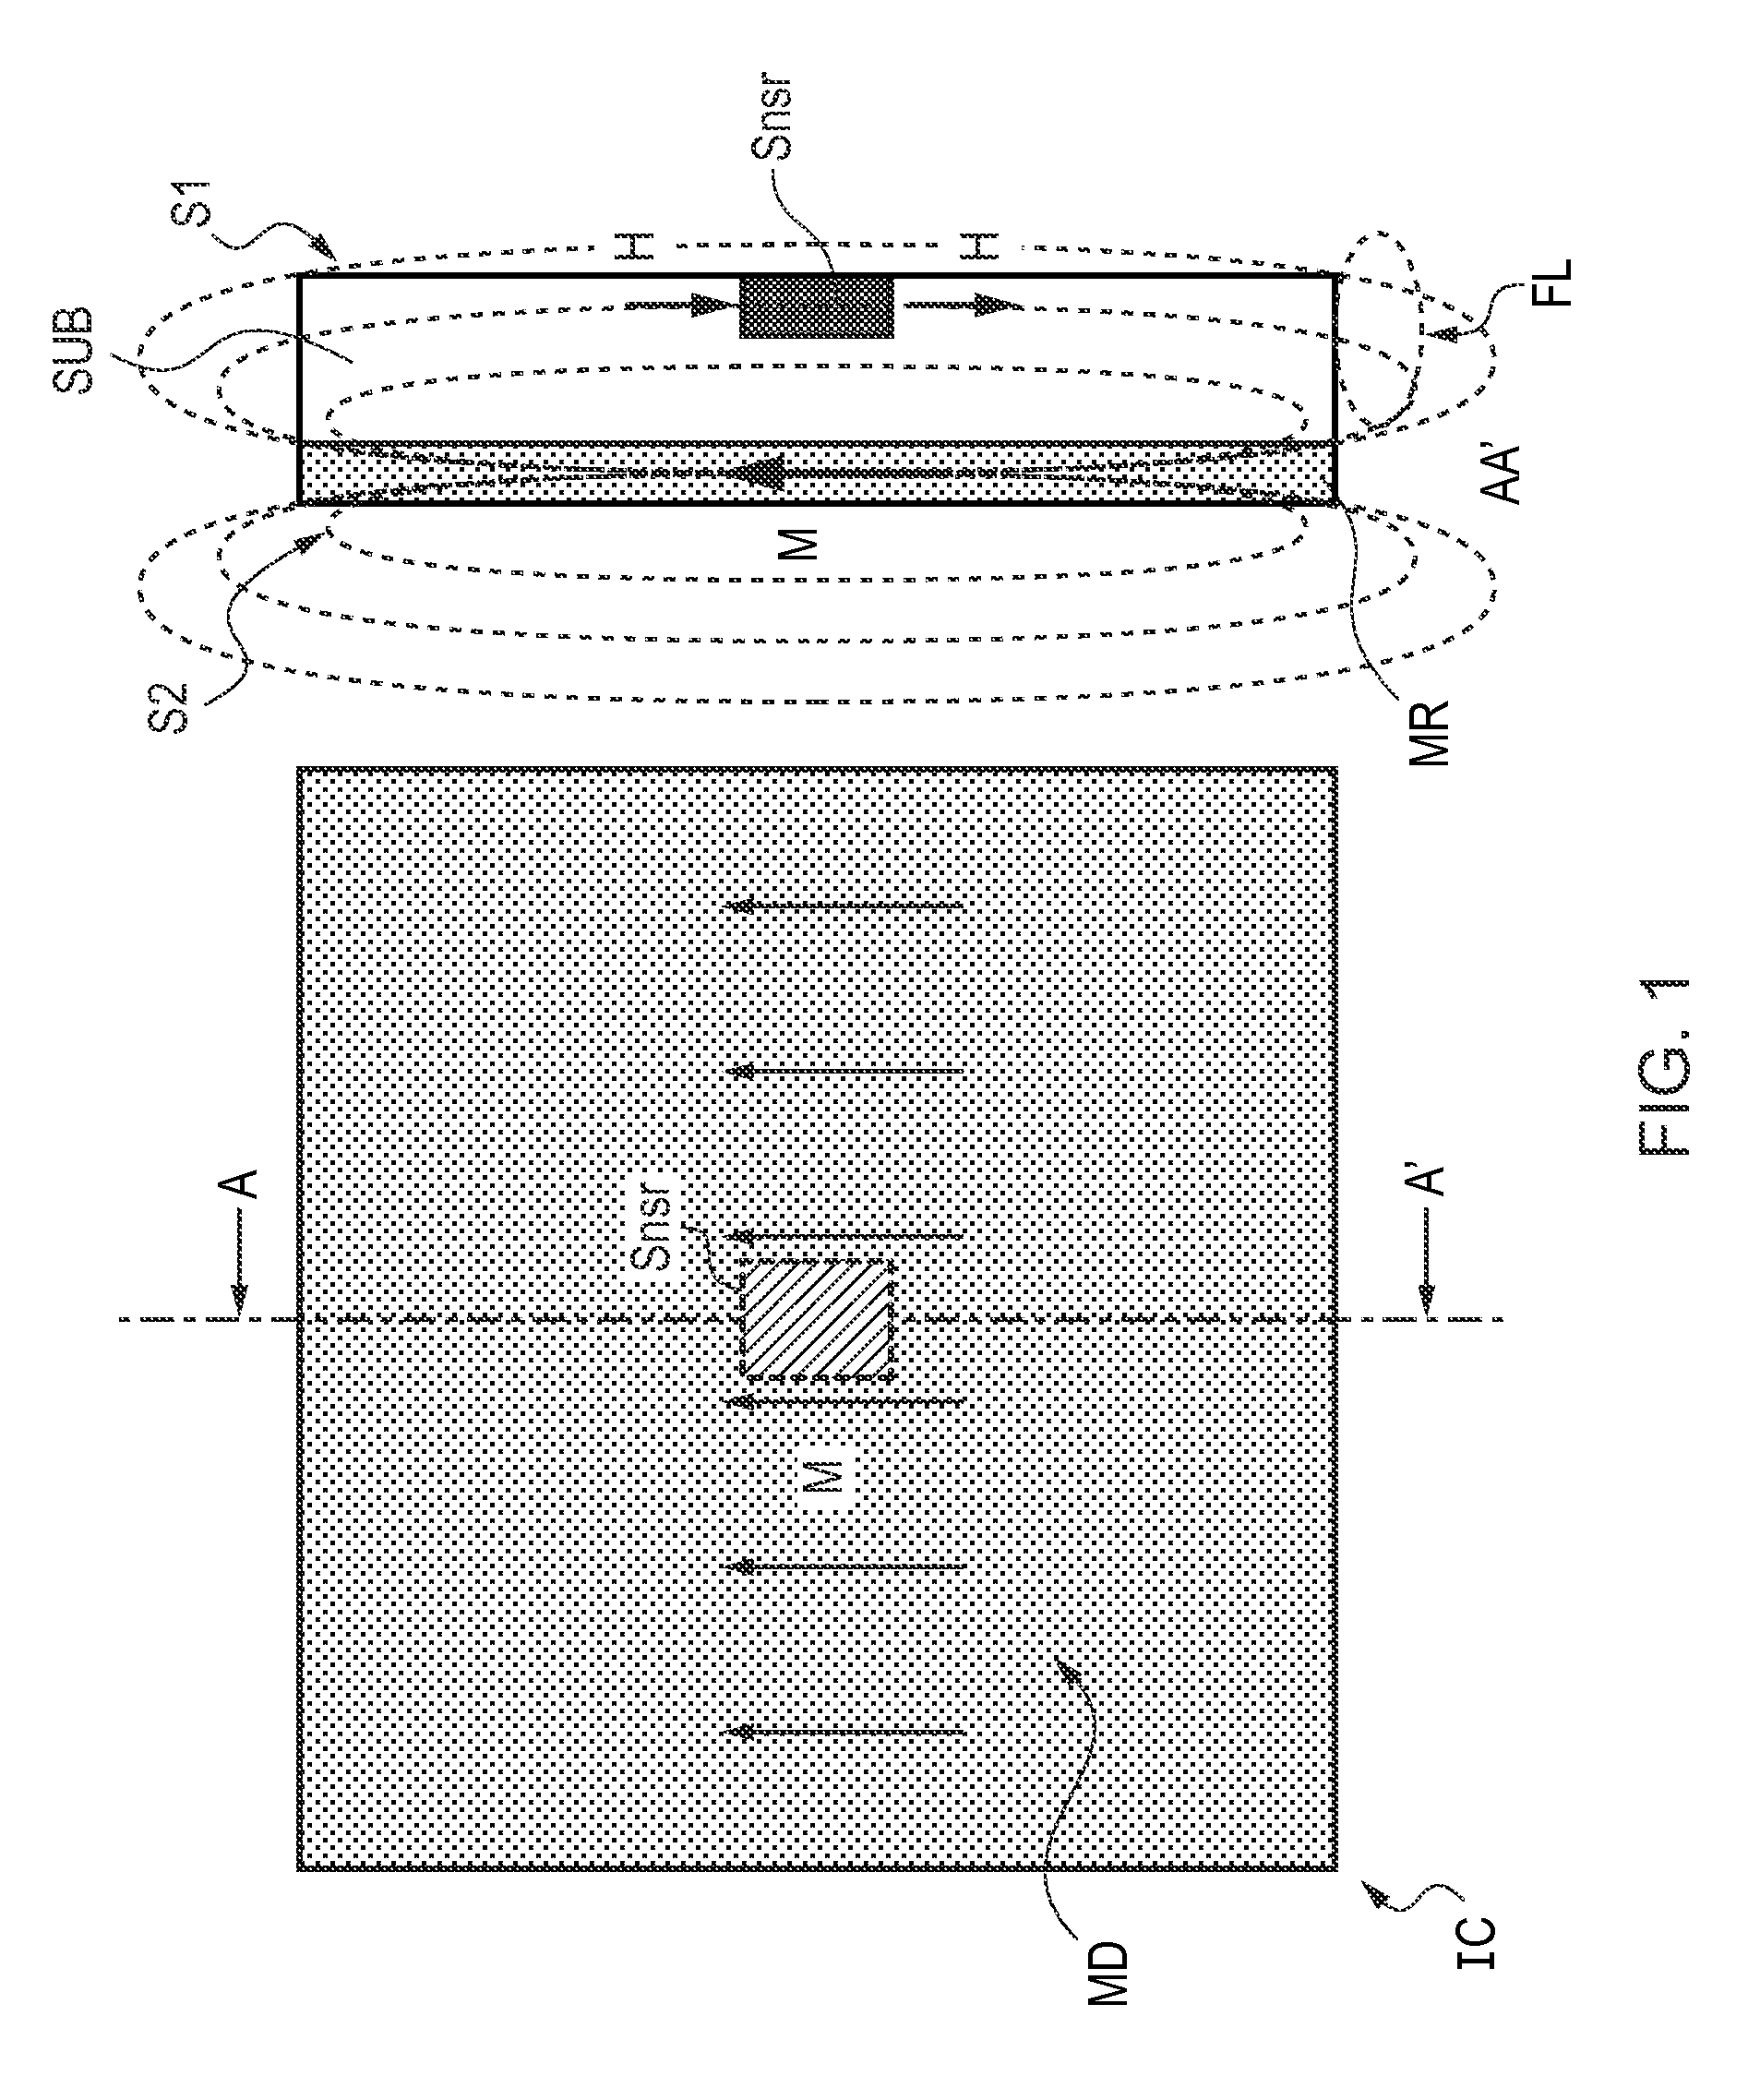 Magnetic detection of back-side layer